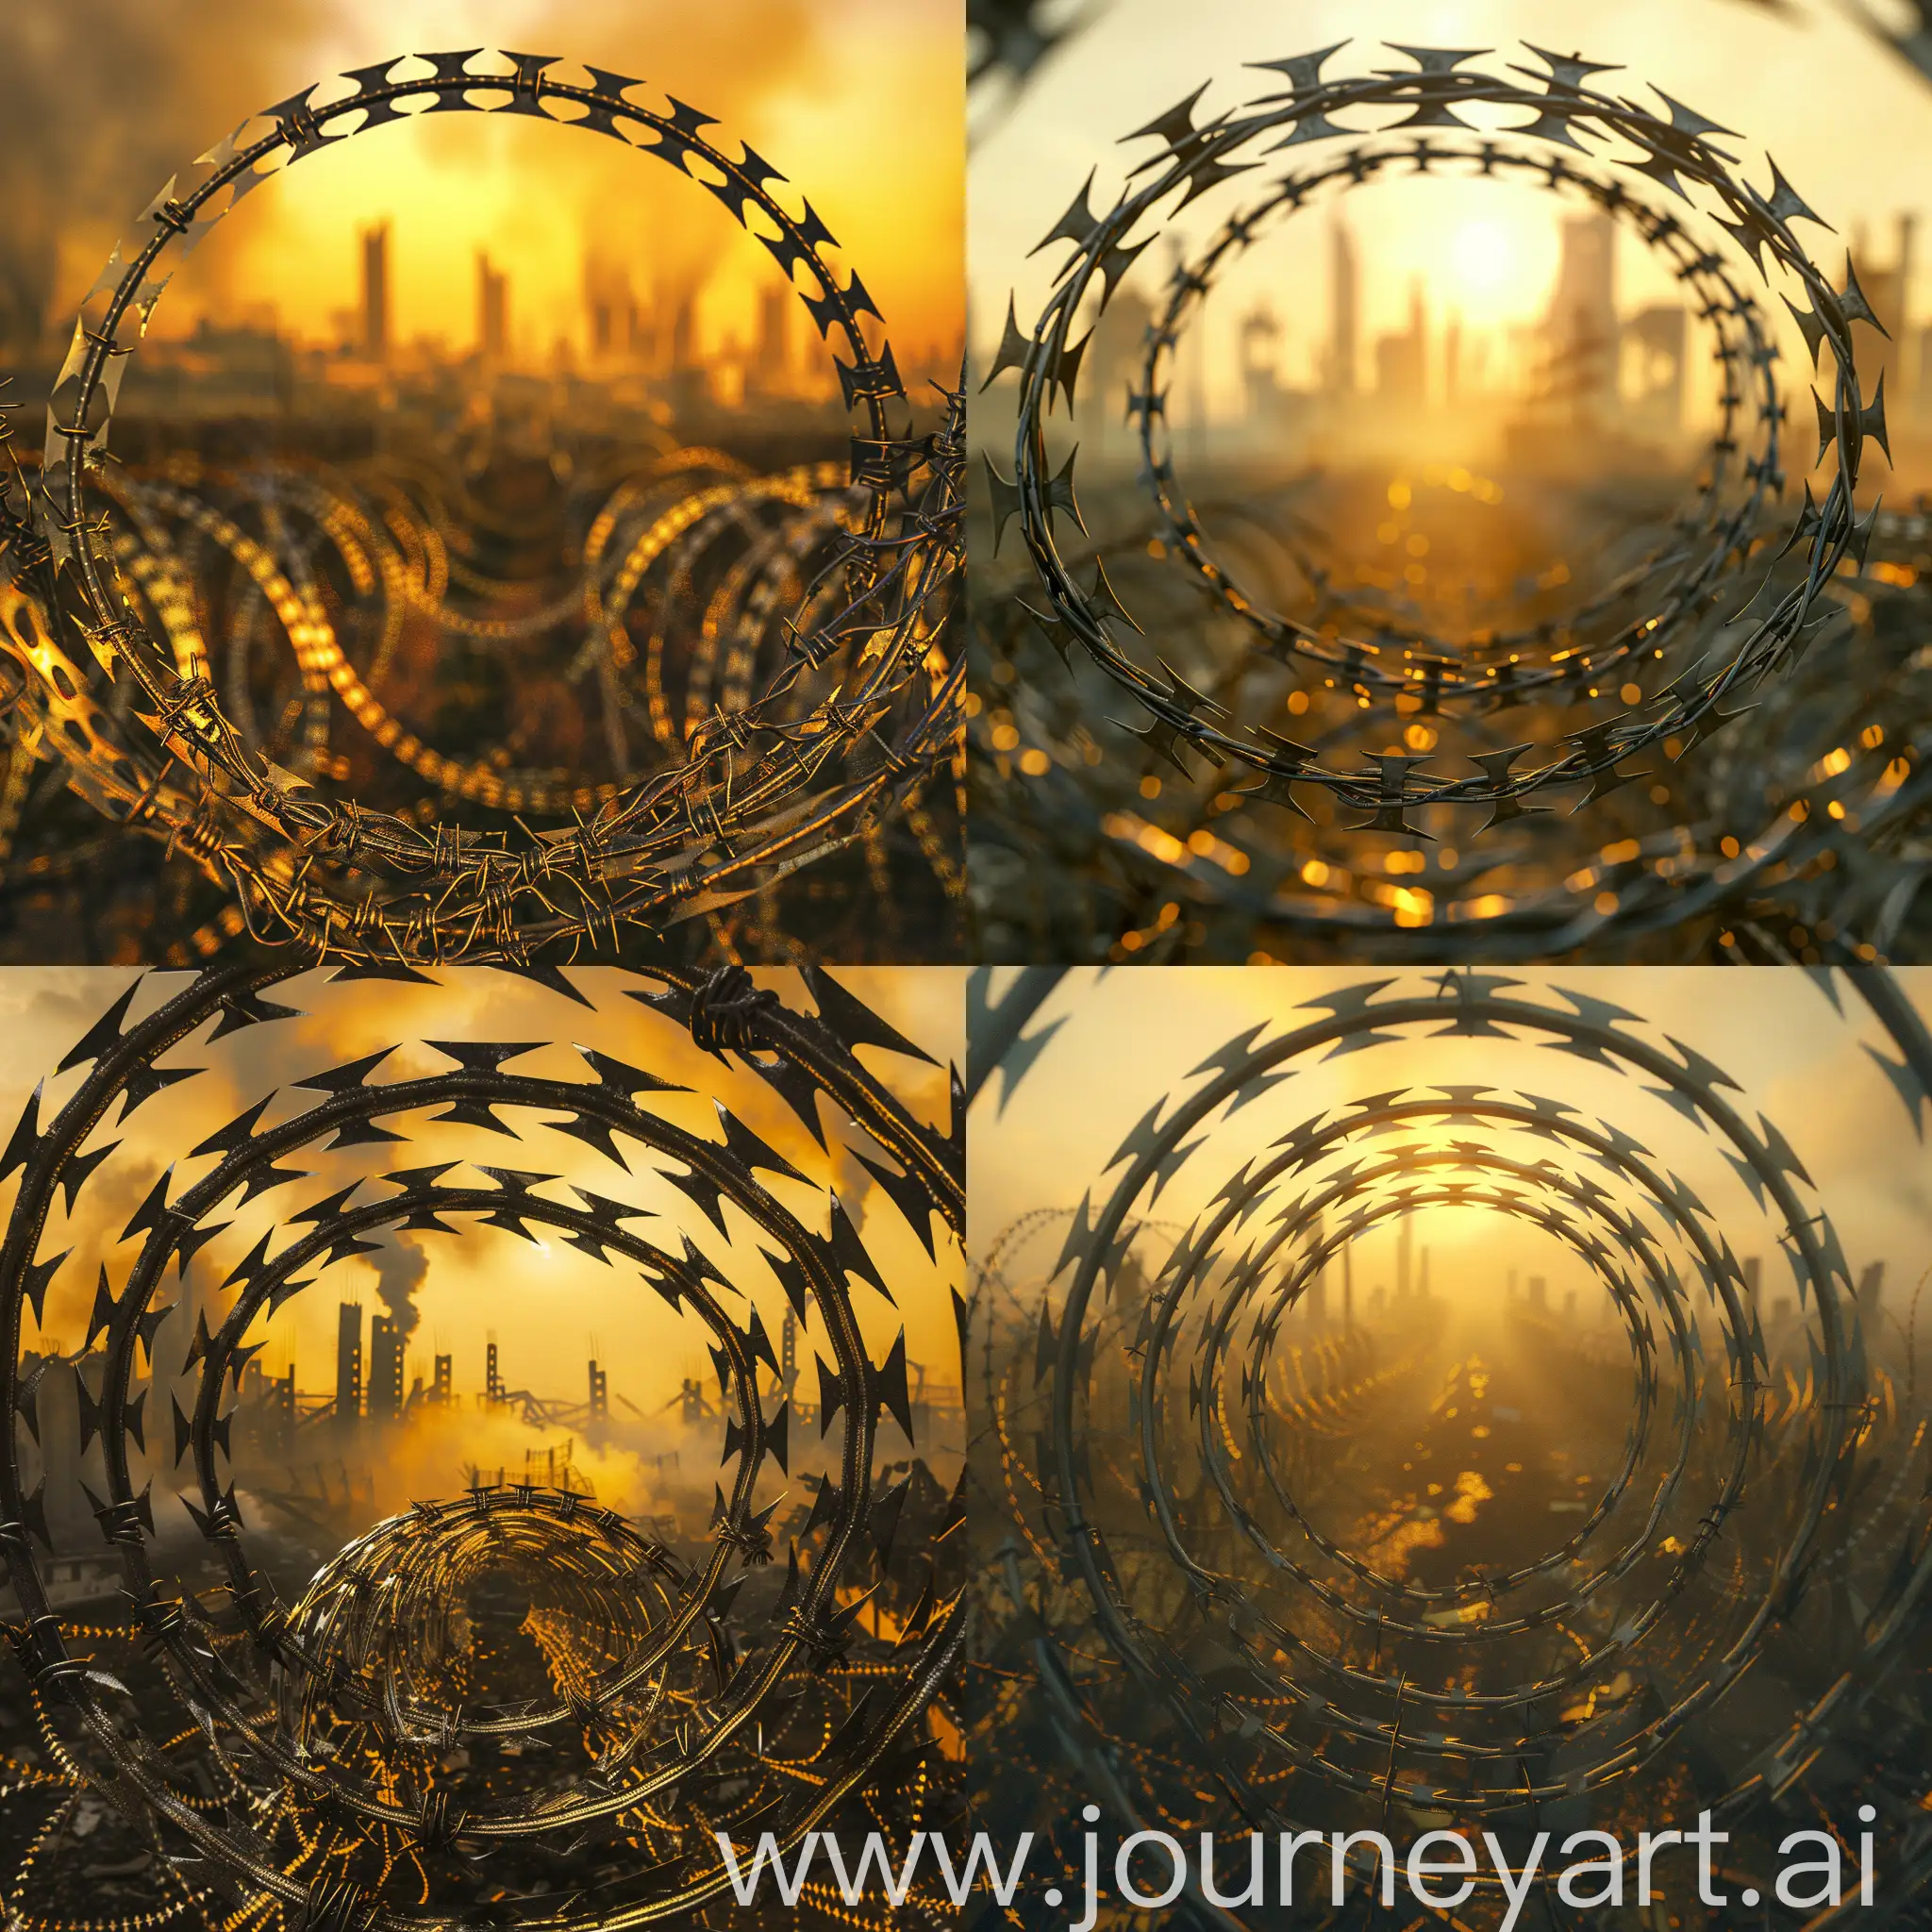 Dystopian-Dawn-Circle-of-Razor-Barbed-Wire-Surrounding-a-Devastated-City